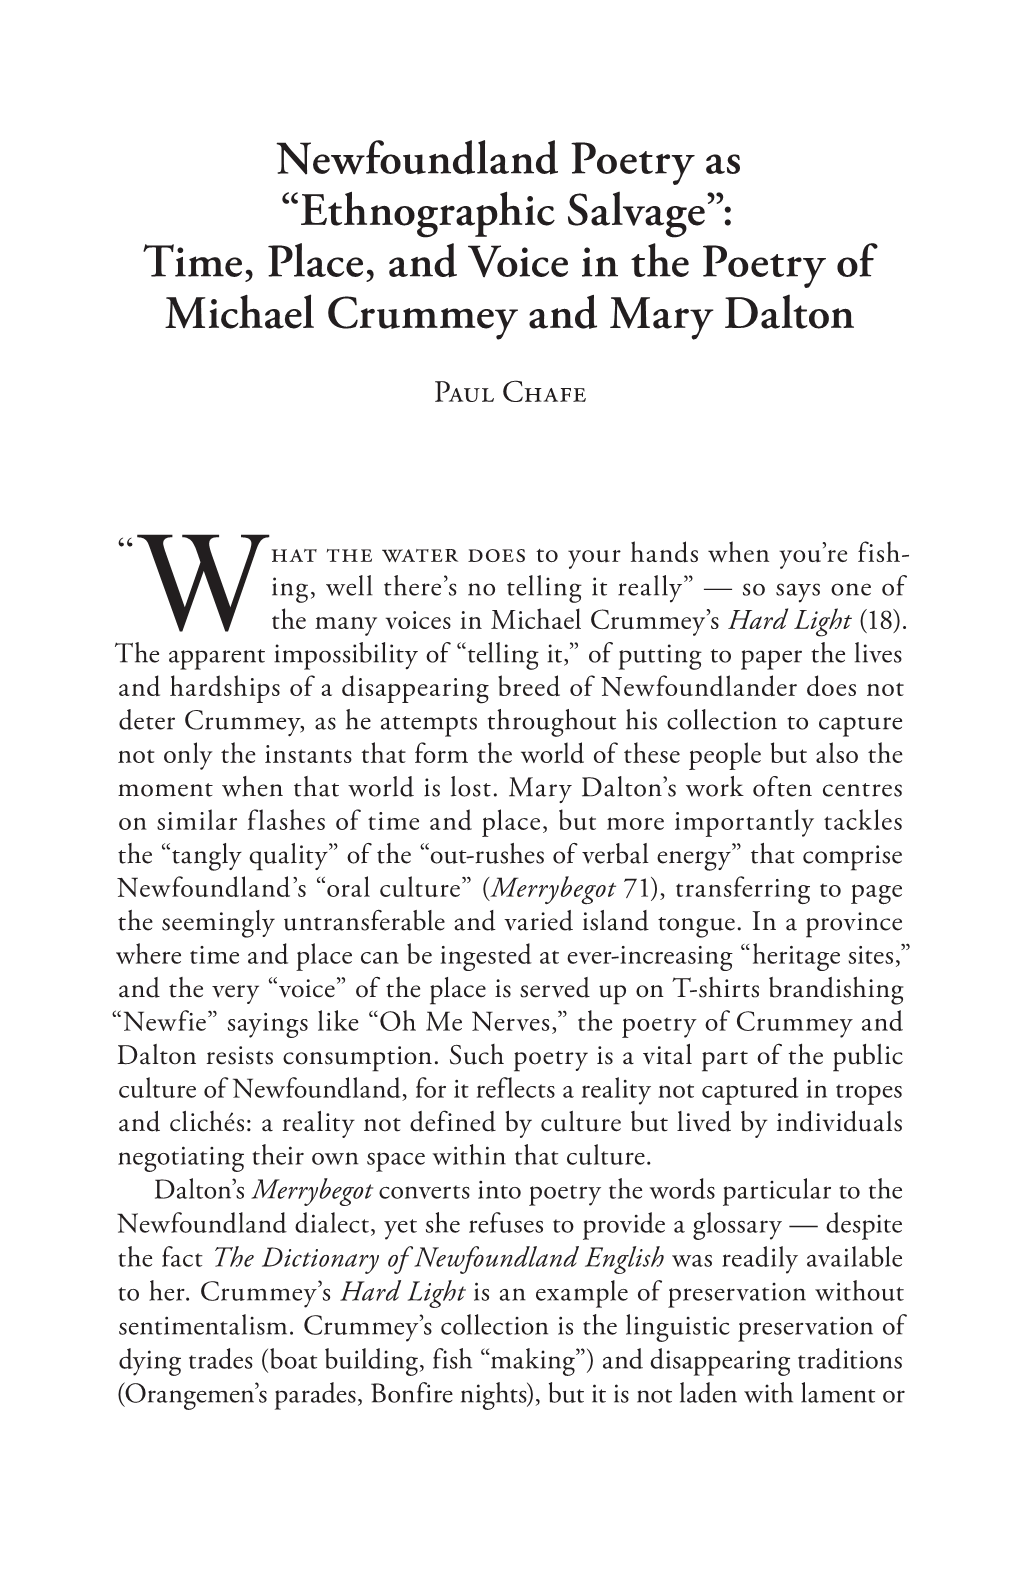 Newfoundland Poetry As “Ethnographic Salvage”: Time, Place, and Voice in the Poetry of Michael Crummey and Mary Dalton